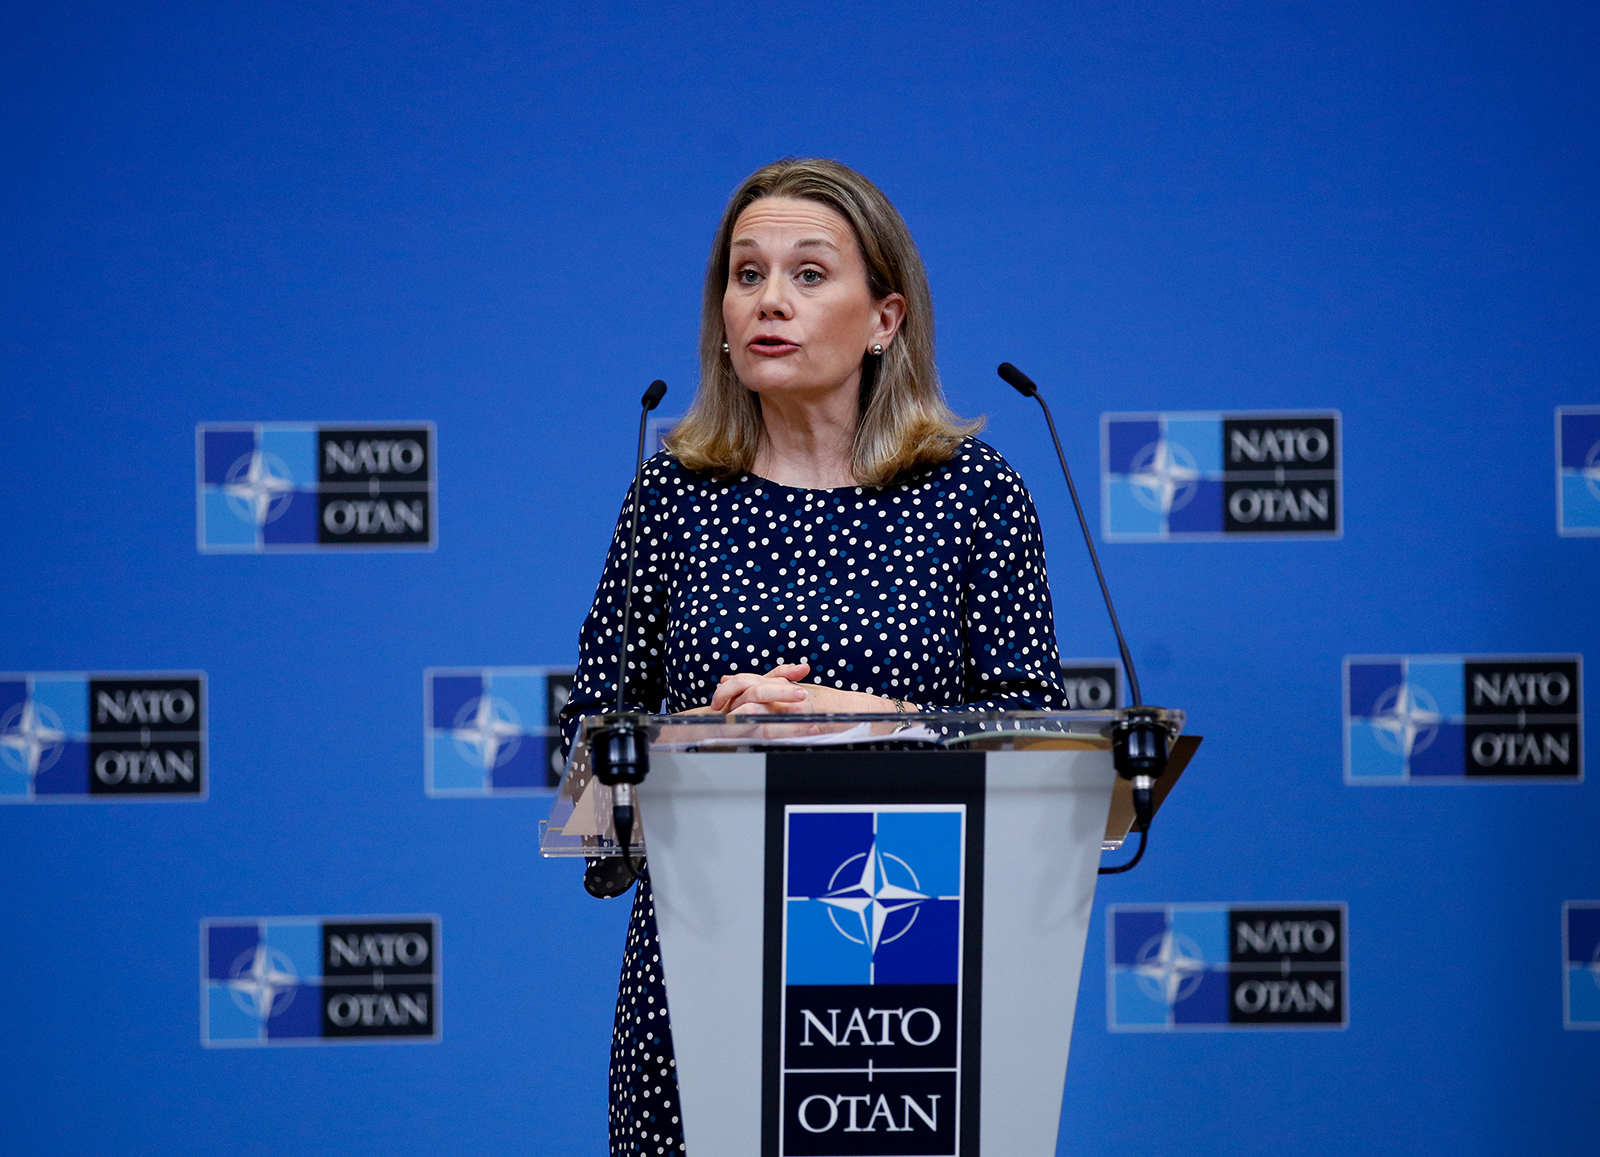 US Ambassador to NATO Julianne Smith speaks during a news briefing on the eve of a meeting of alliance defence ministers in Brussels, Belgium, on February 15.